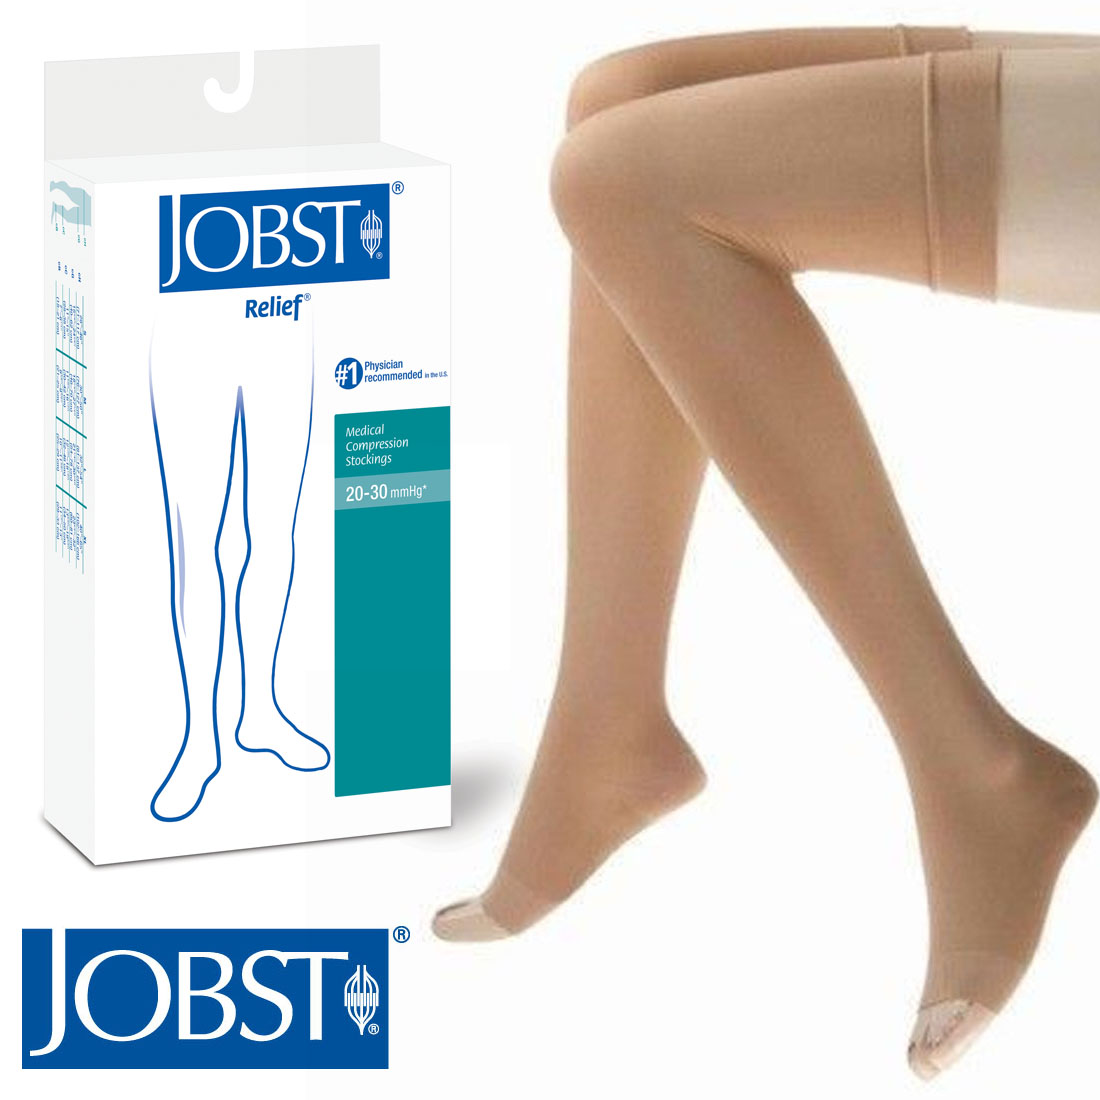 Jobst Relief Size Chart